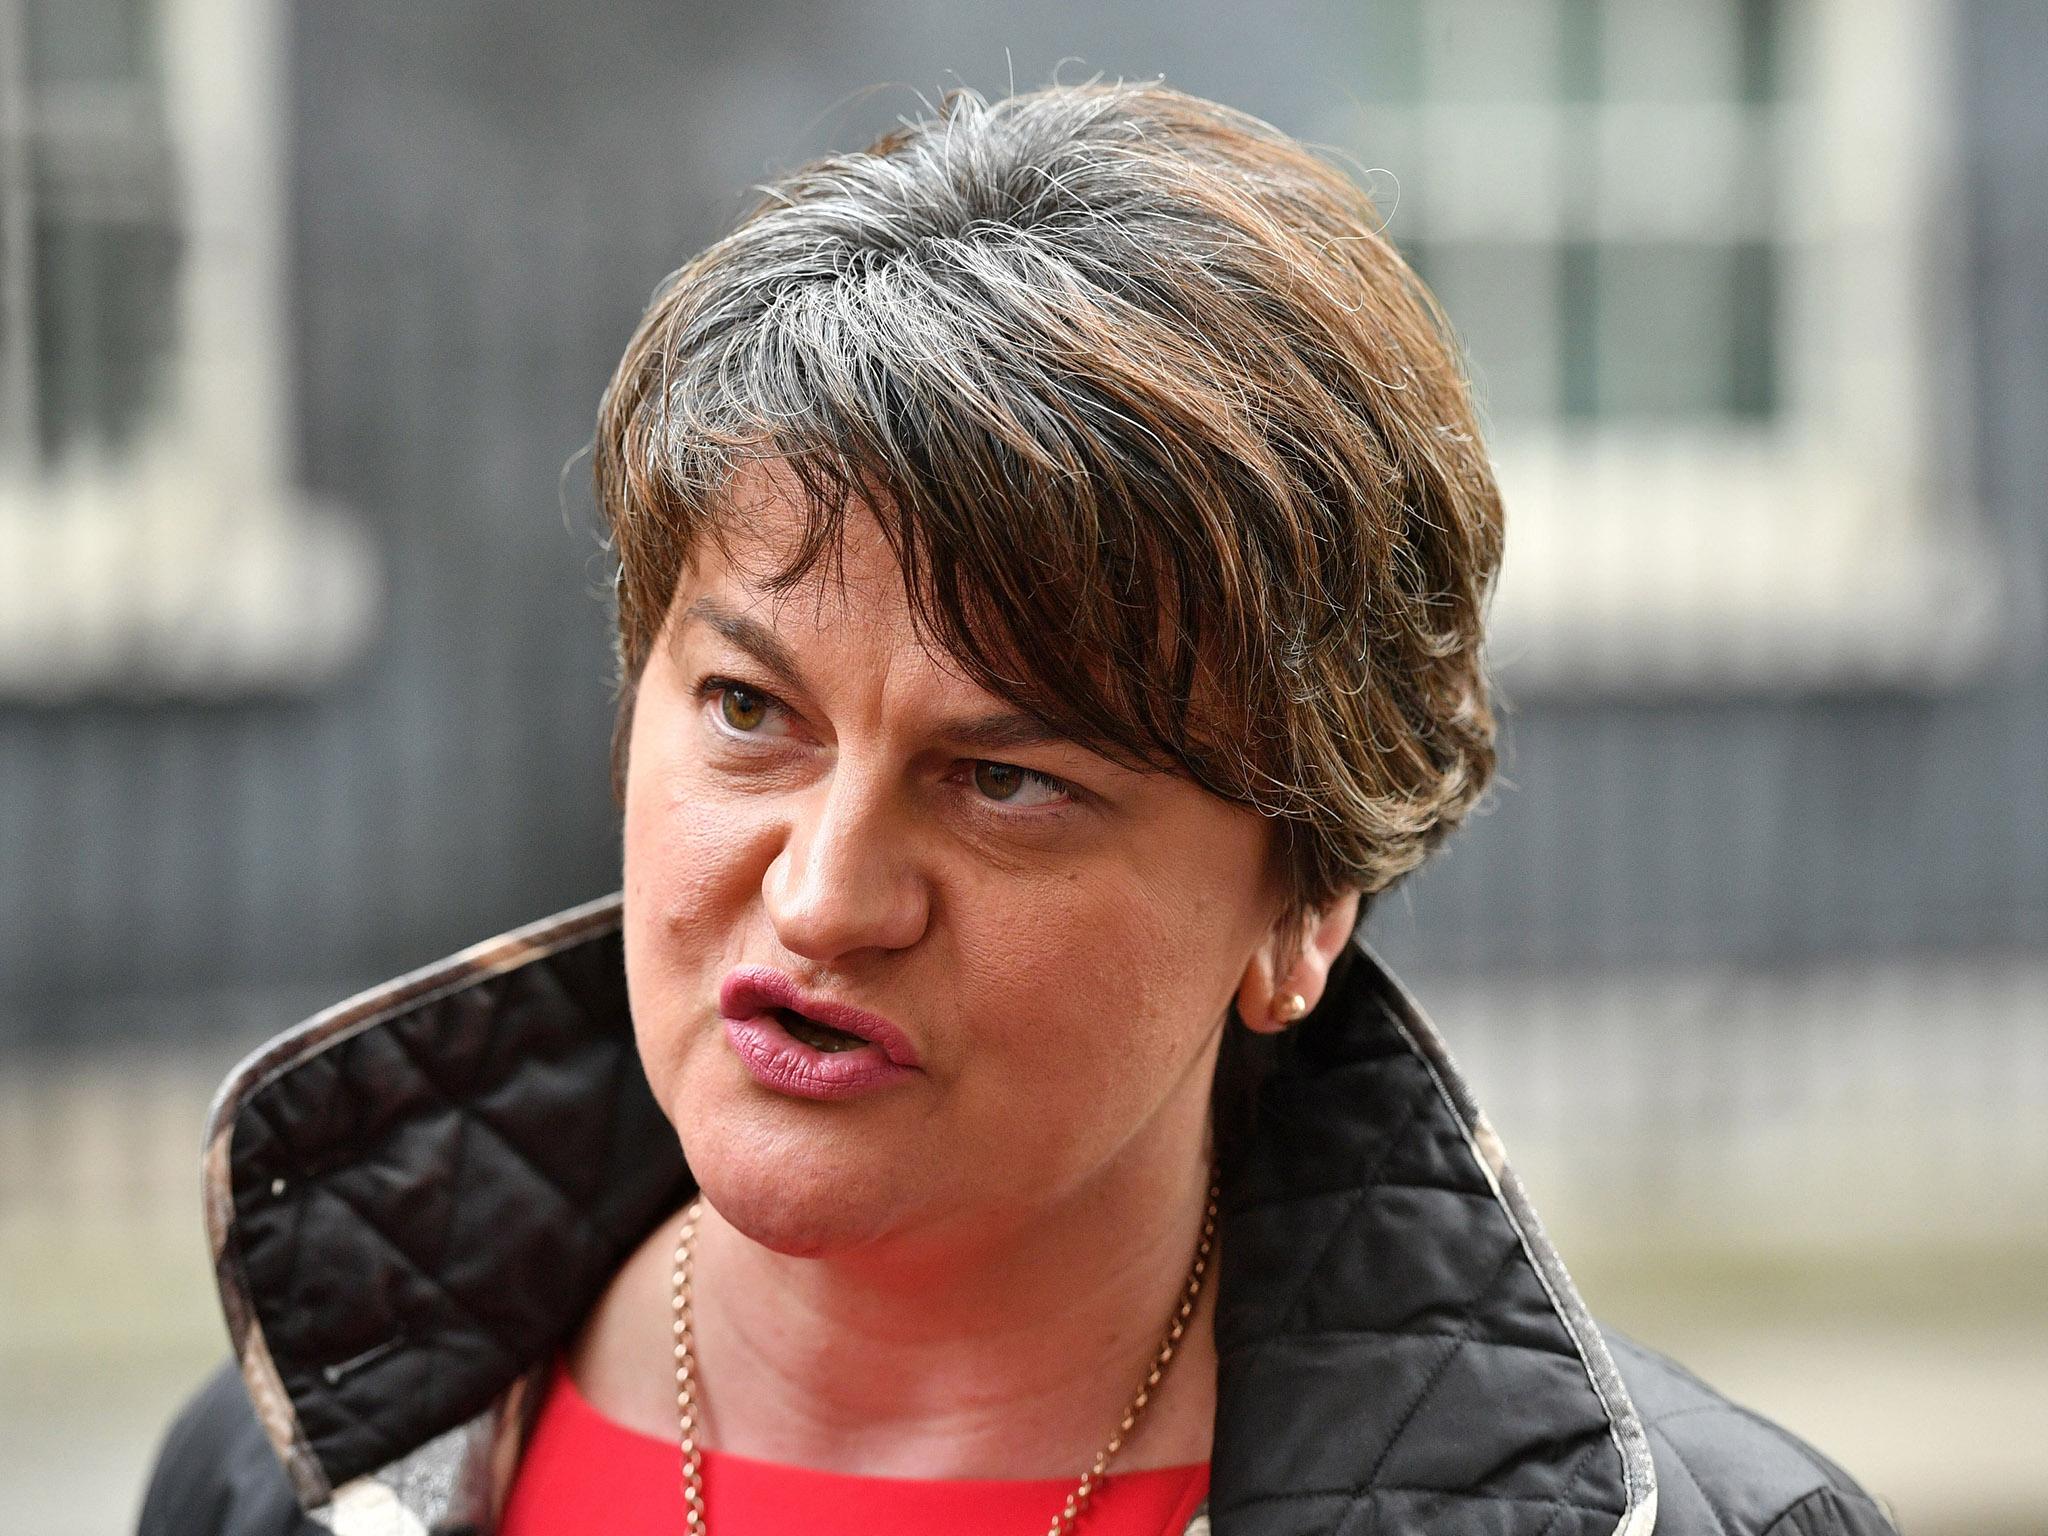 Britain and Ireland should seek &apos;mutual interests&apos; after Brexit, Arlene Foster says